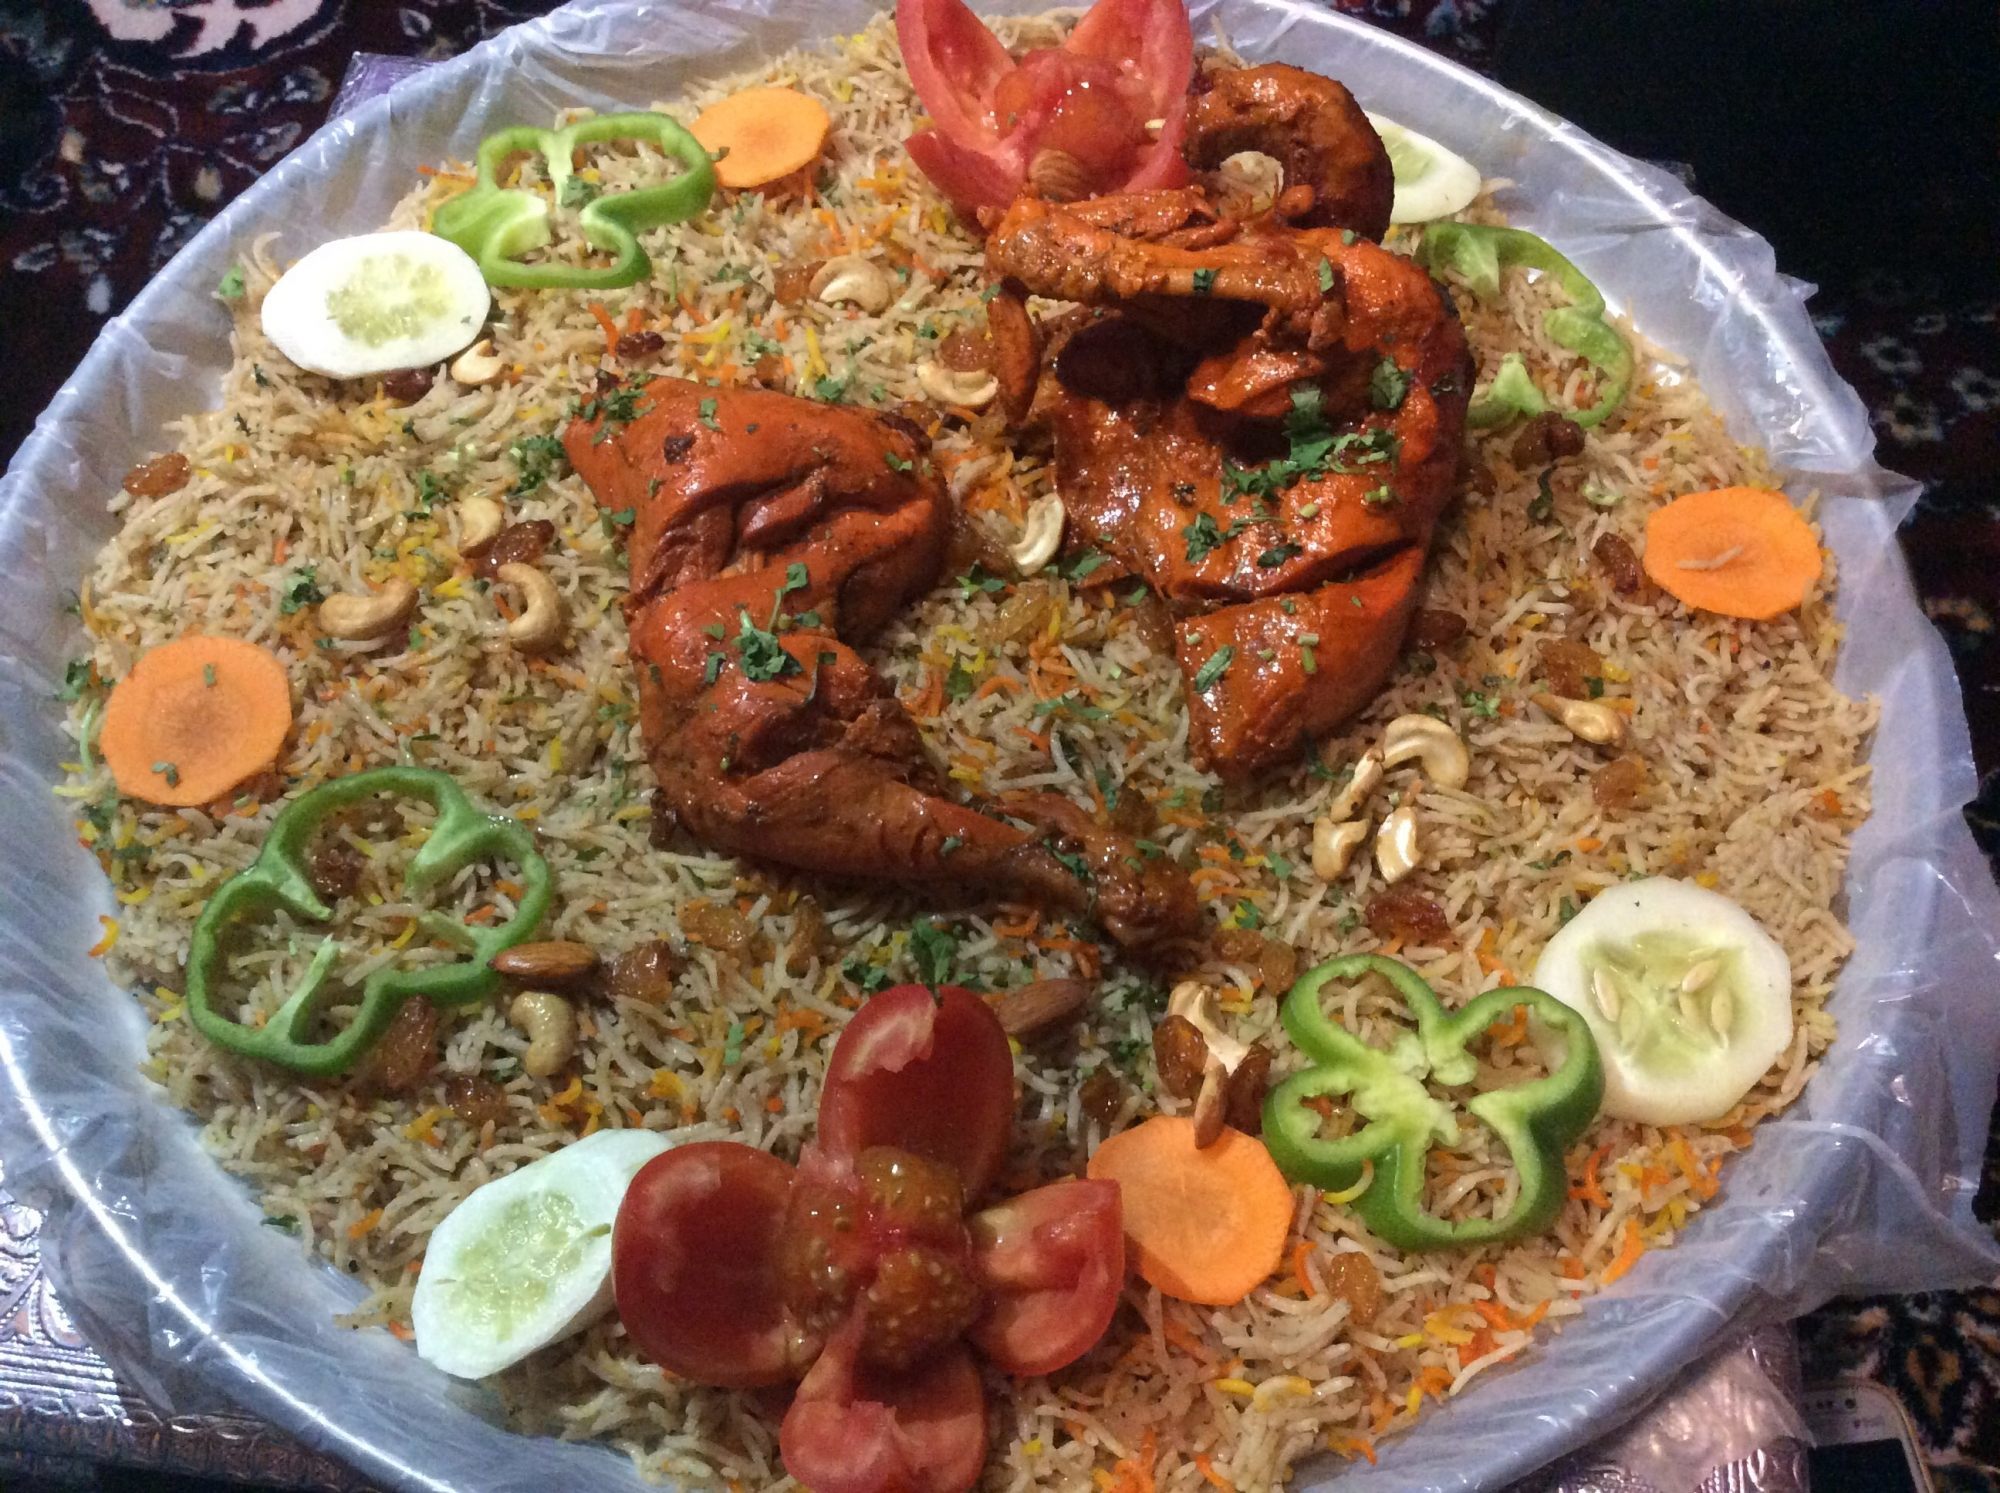 Top 10 Popular Mandi Places in Karachi You Must Try